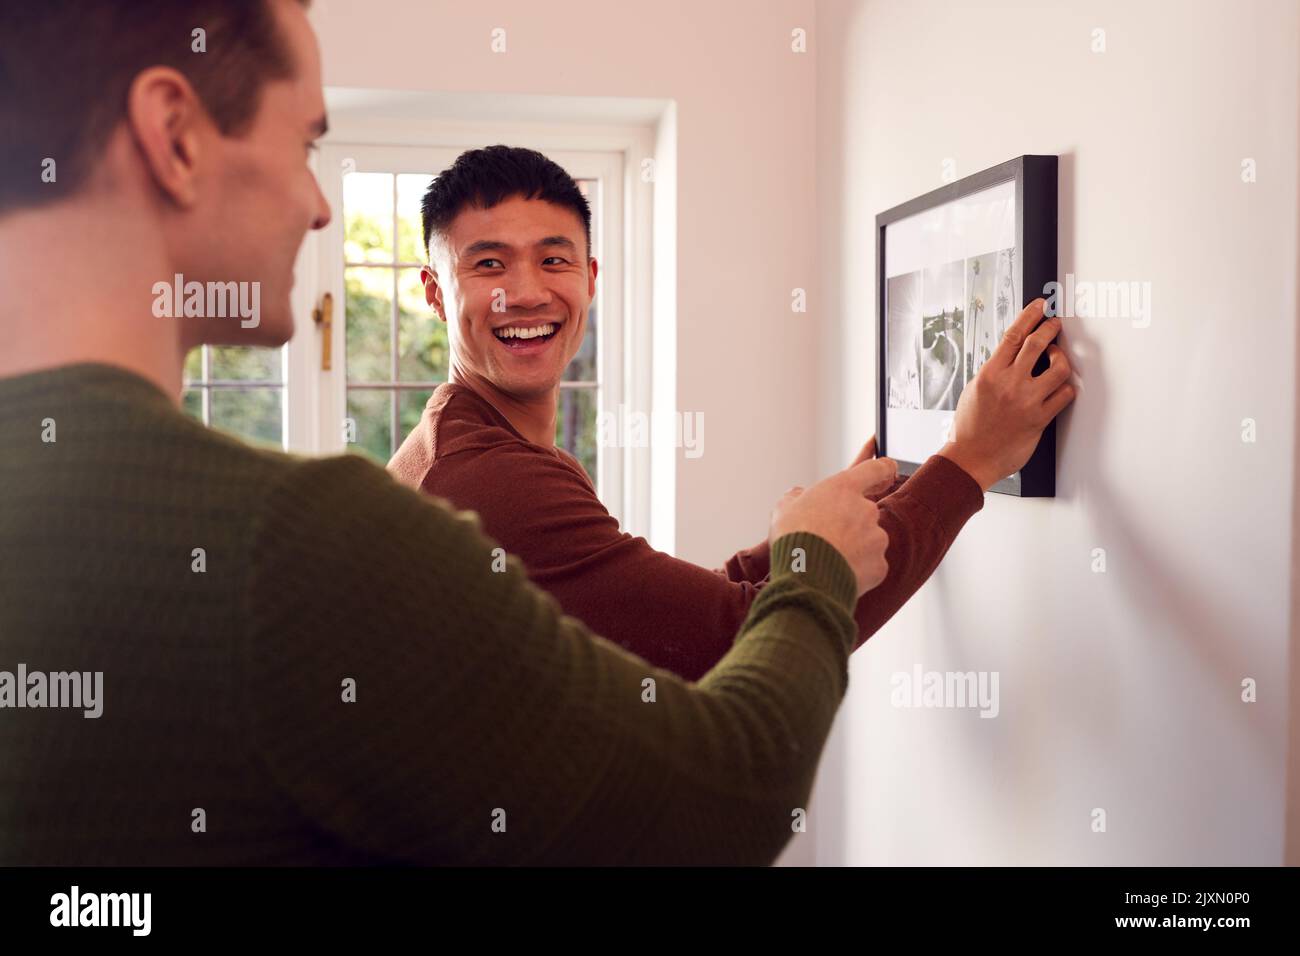 Same Sex Male Couple Hanging Picture On Wall At Home Together Stock Photo